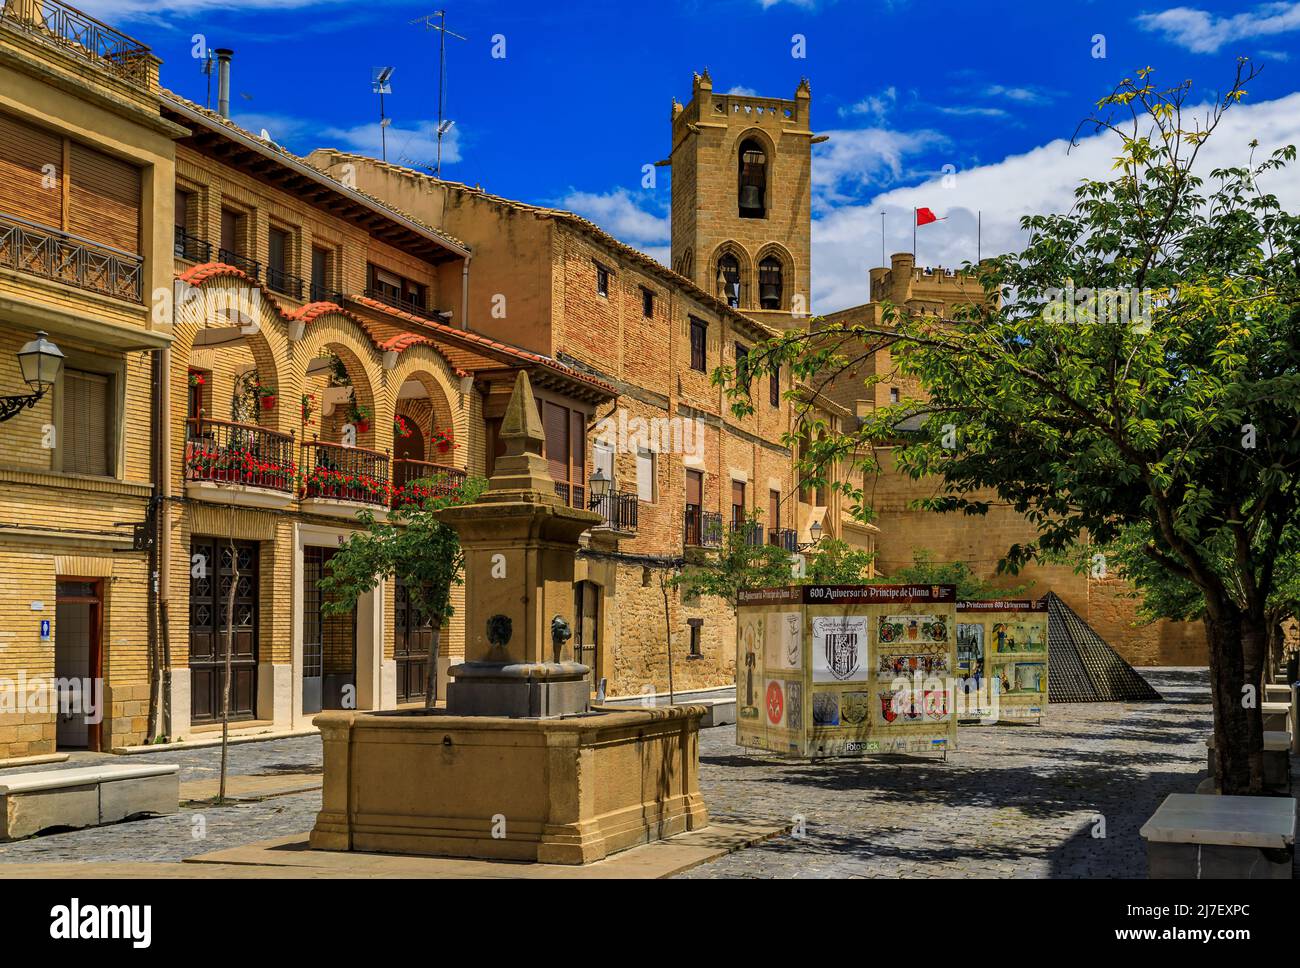 Olite, Spain - June 23, 2021: Medieval stone drinking fountain on Plaza Carlos III El Noble town square near the magnificent Royal Palace castle Stock Photo